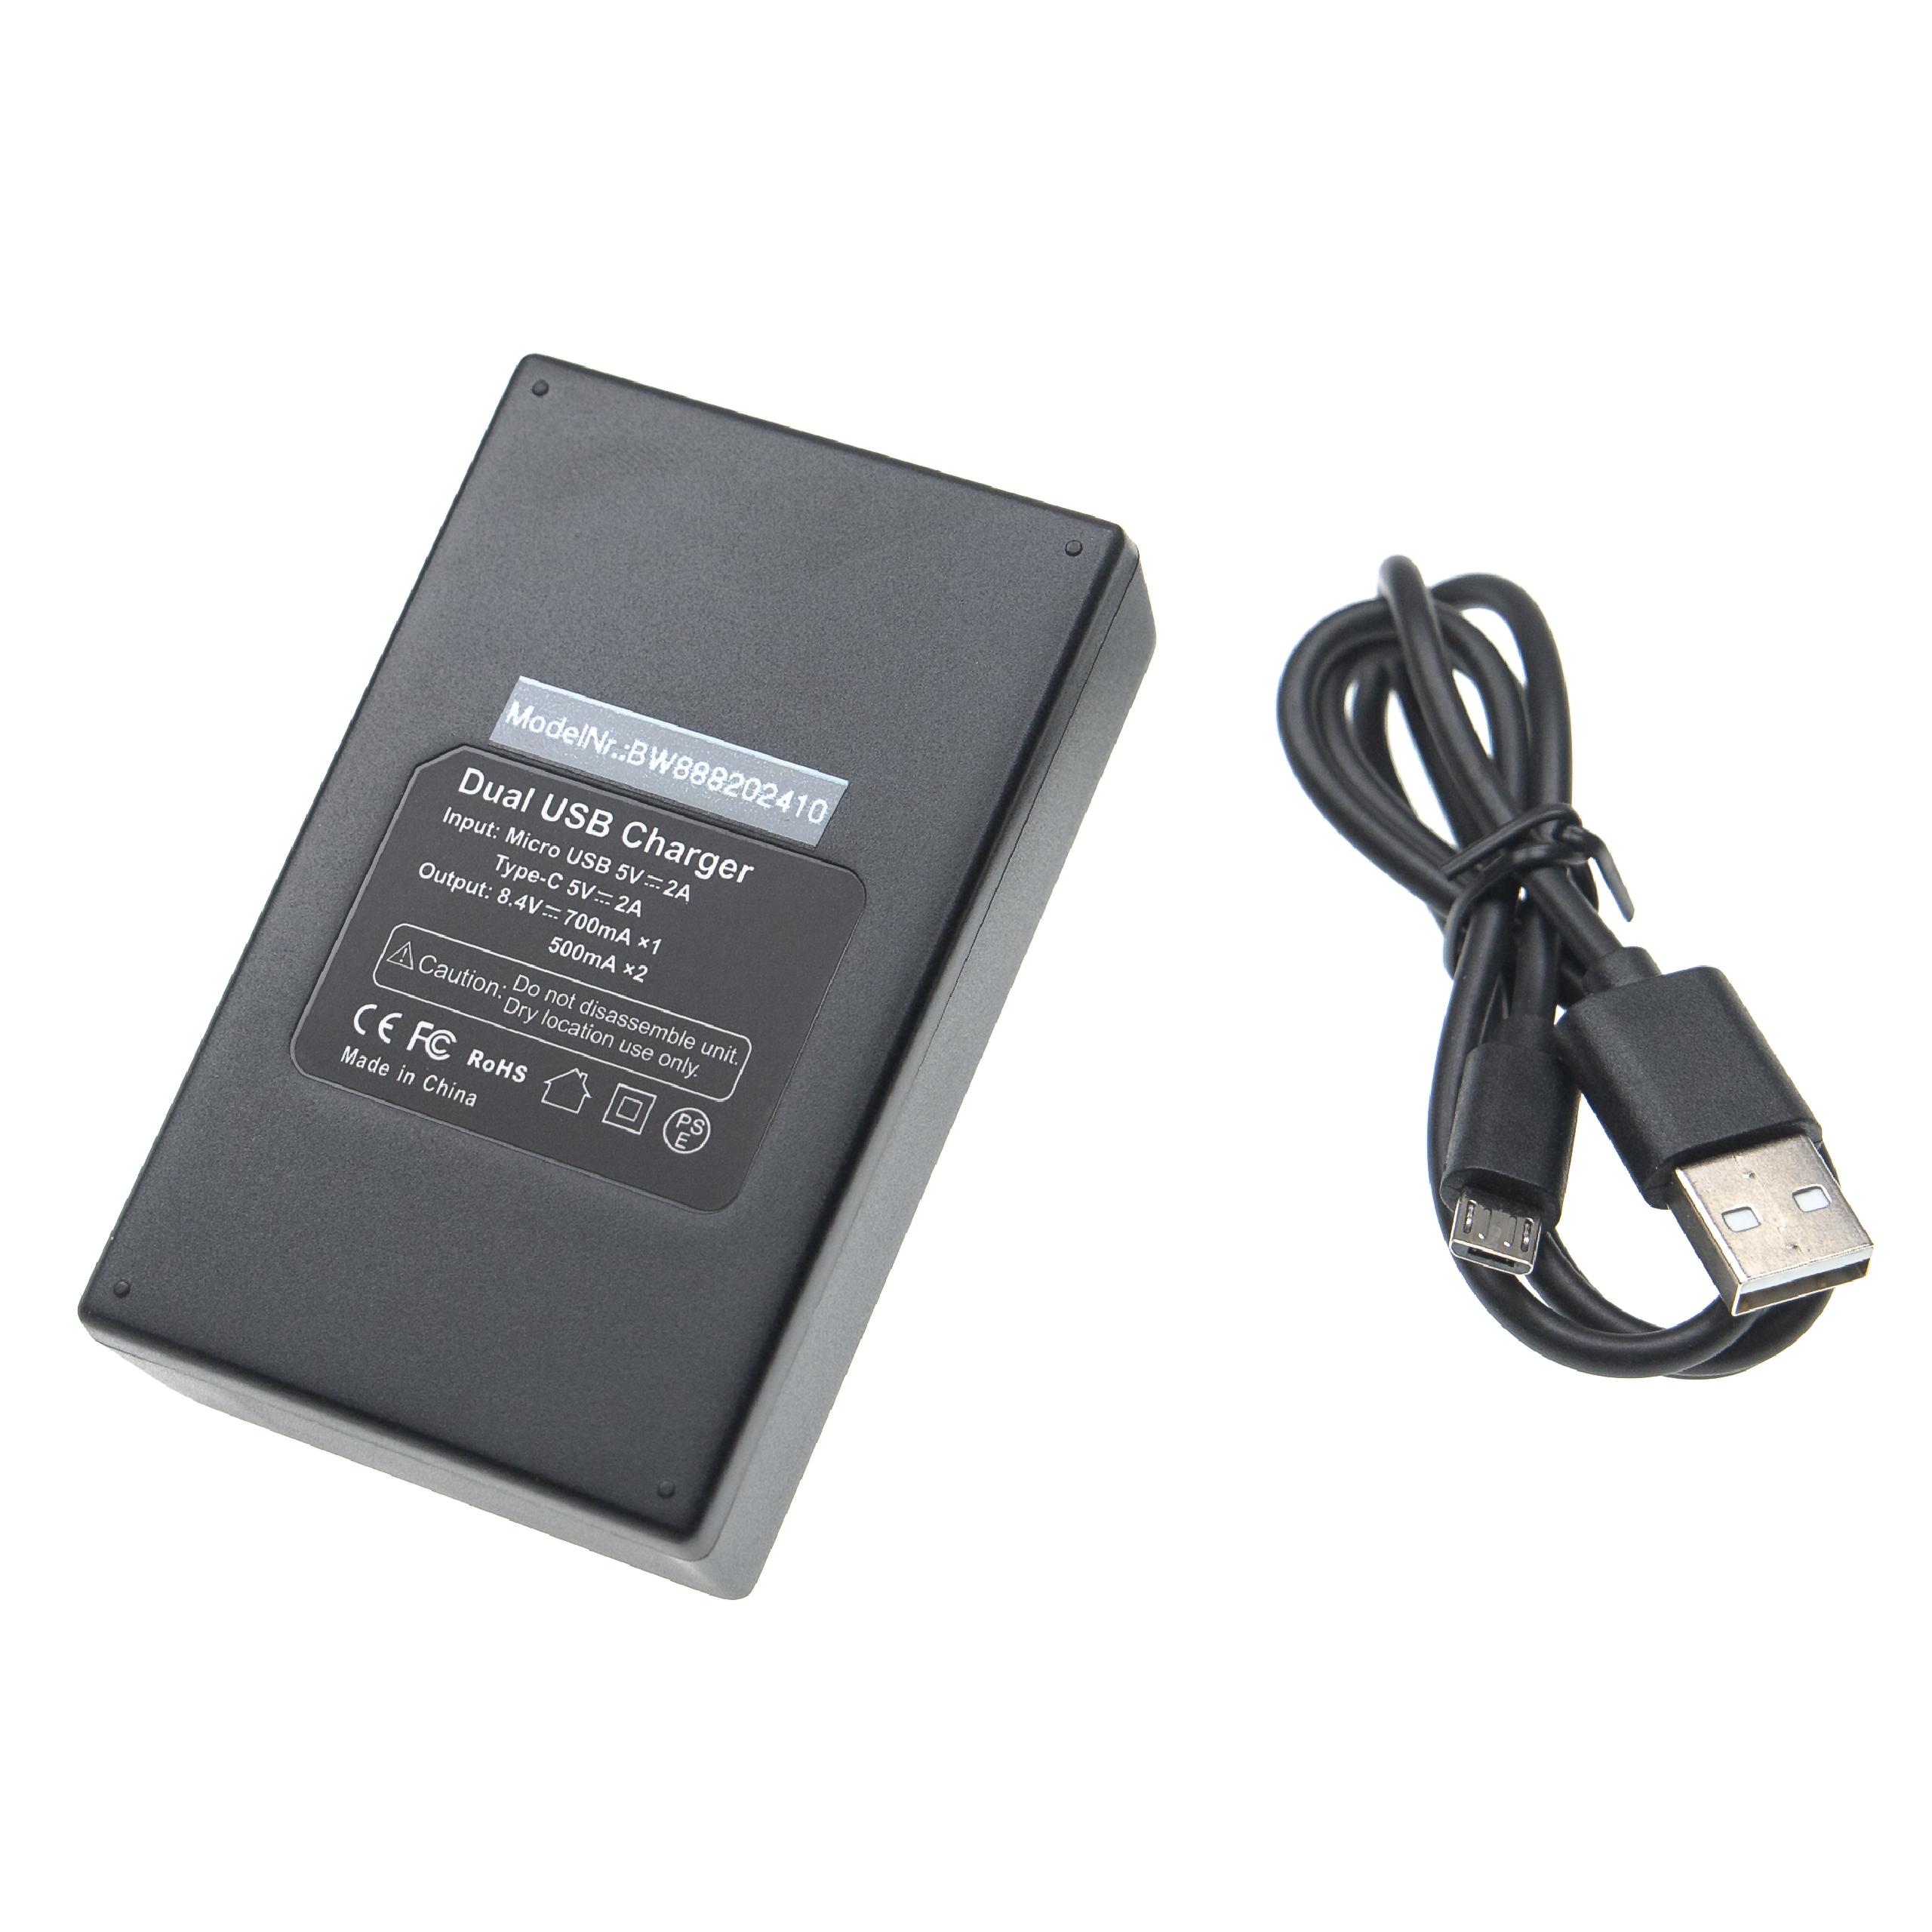 Battery Charger suitable for X-E1 Camera etc. - 0.5 A, 8.4 V